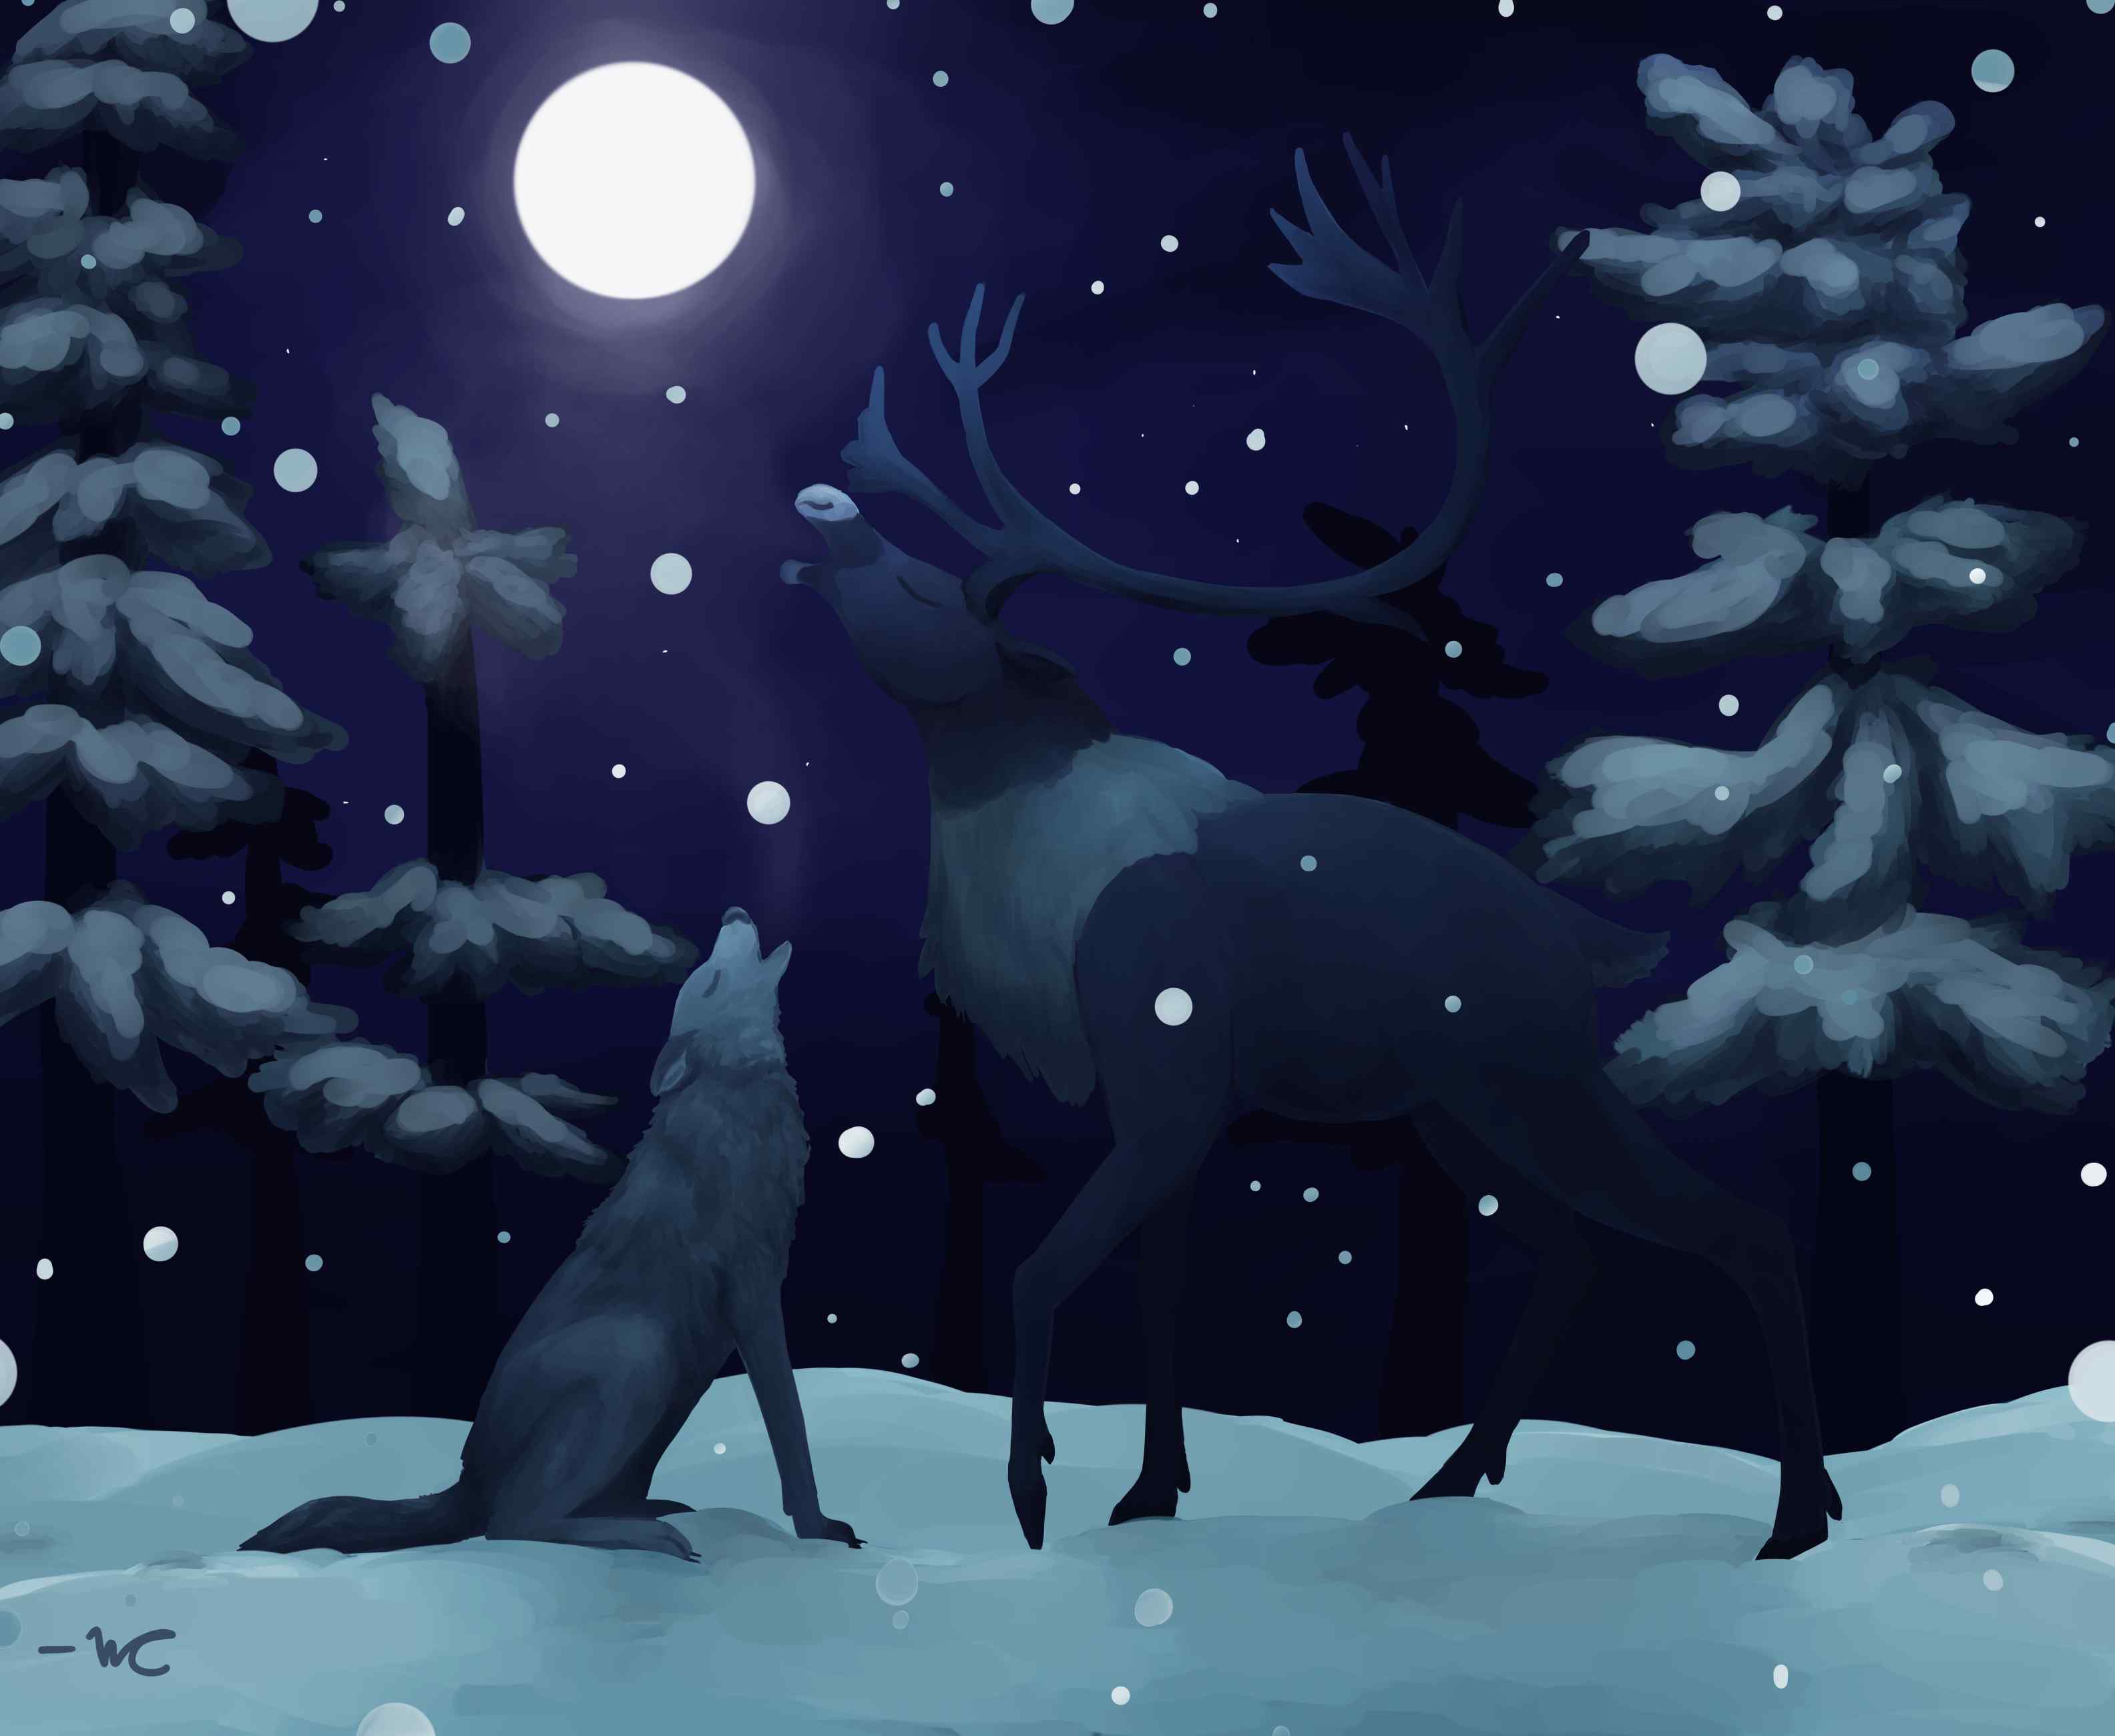 A wolf and a caribou howling at a full moon together. They are in a snowy clearing. There are pine trees behind them. The whole image is done with shades of blue, and white.